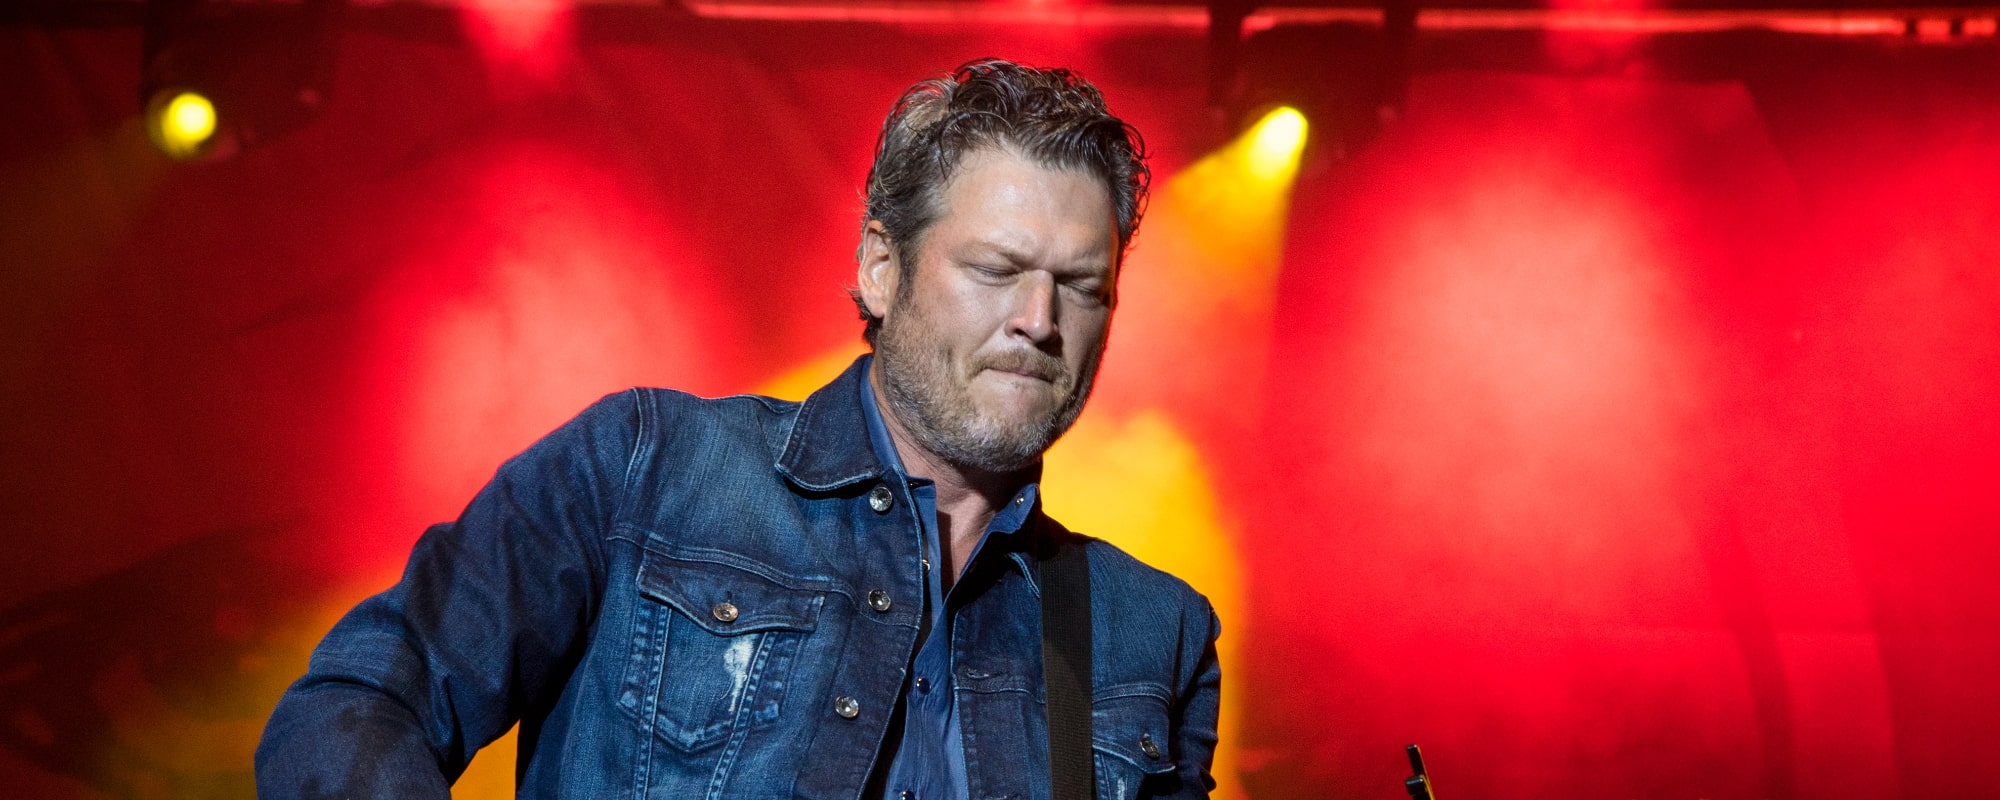 Blake Shelton Prepares to Open New Ole Red Location in Las Vegas, Teases Grand Opening Date